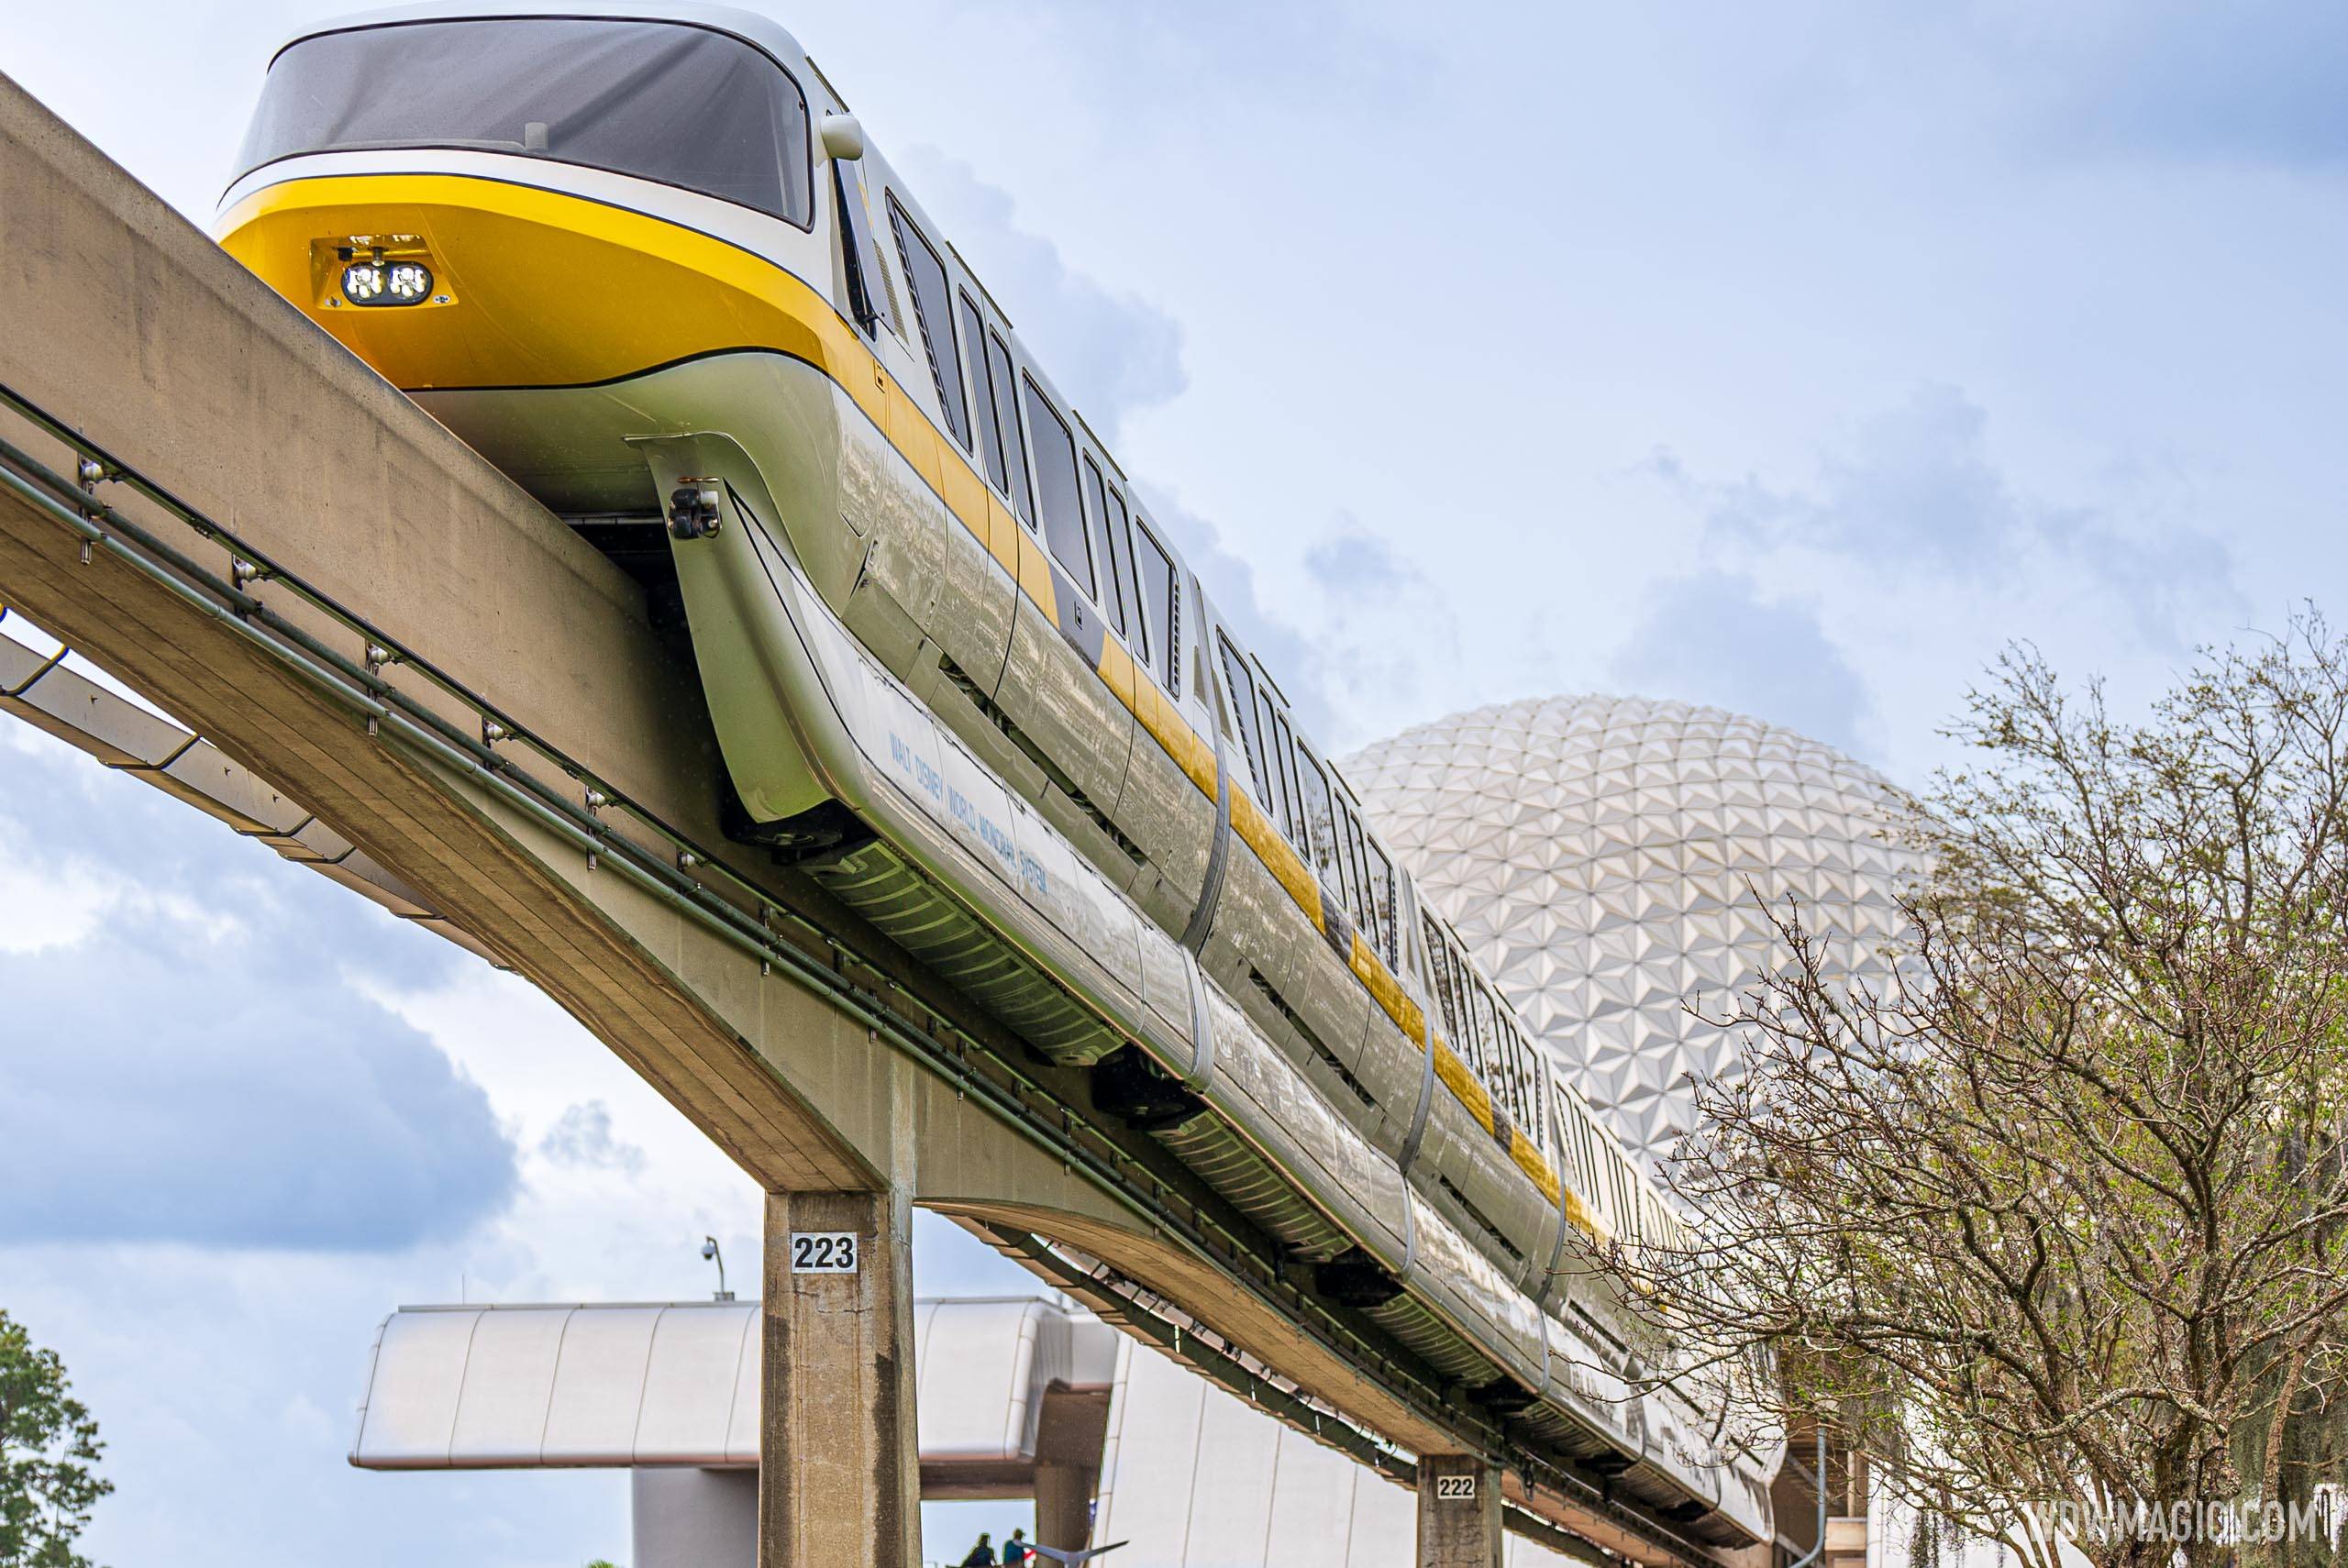 Refurbished Monorail Yellow on the EPCOT Beam leaving the EPCOT station